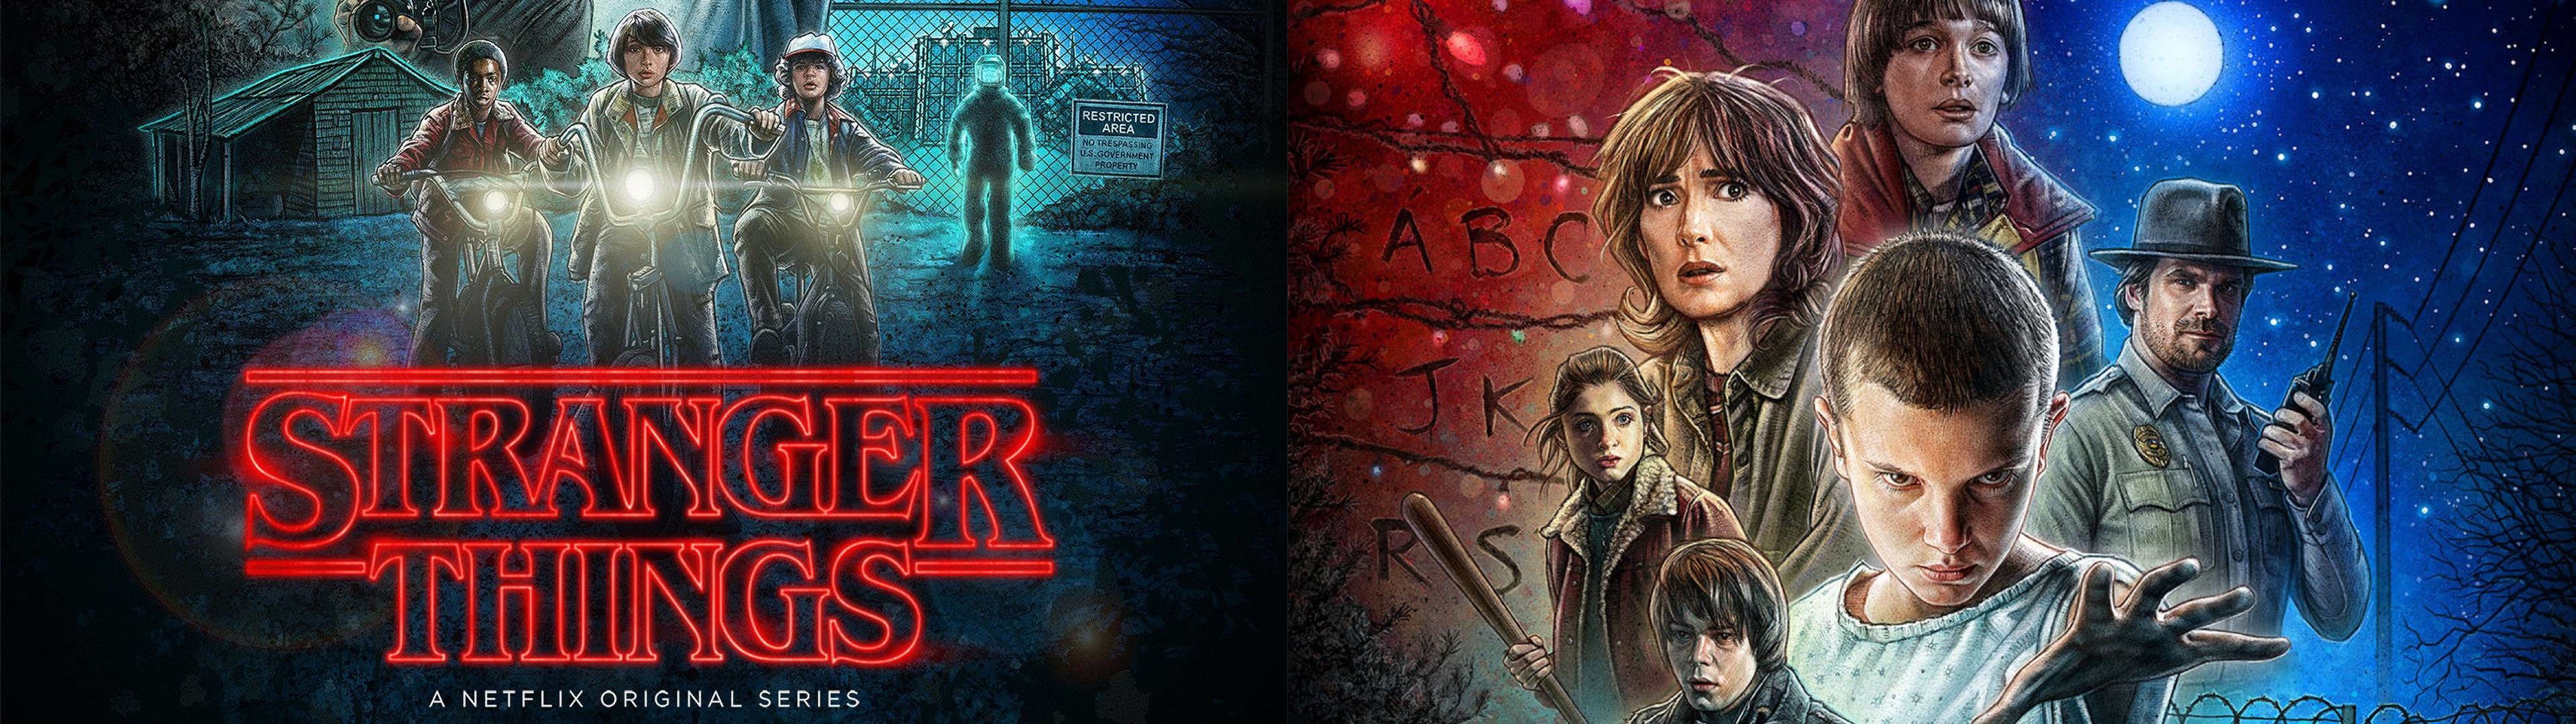 3840x1080 [] Made some new Stranger Things wallpapers